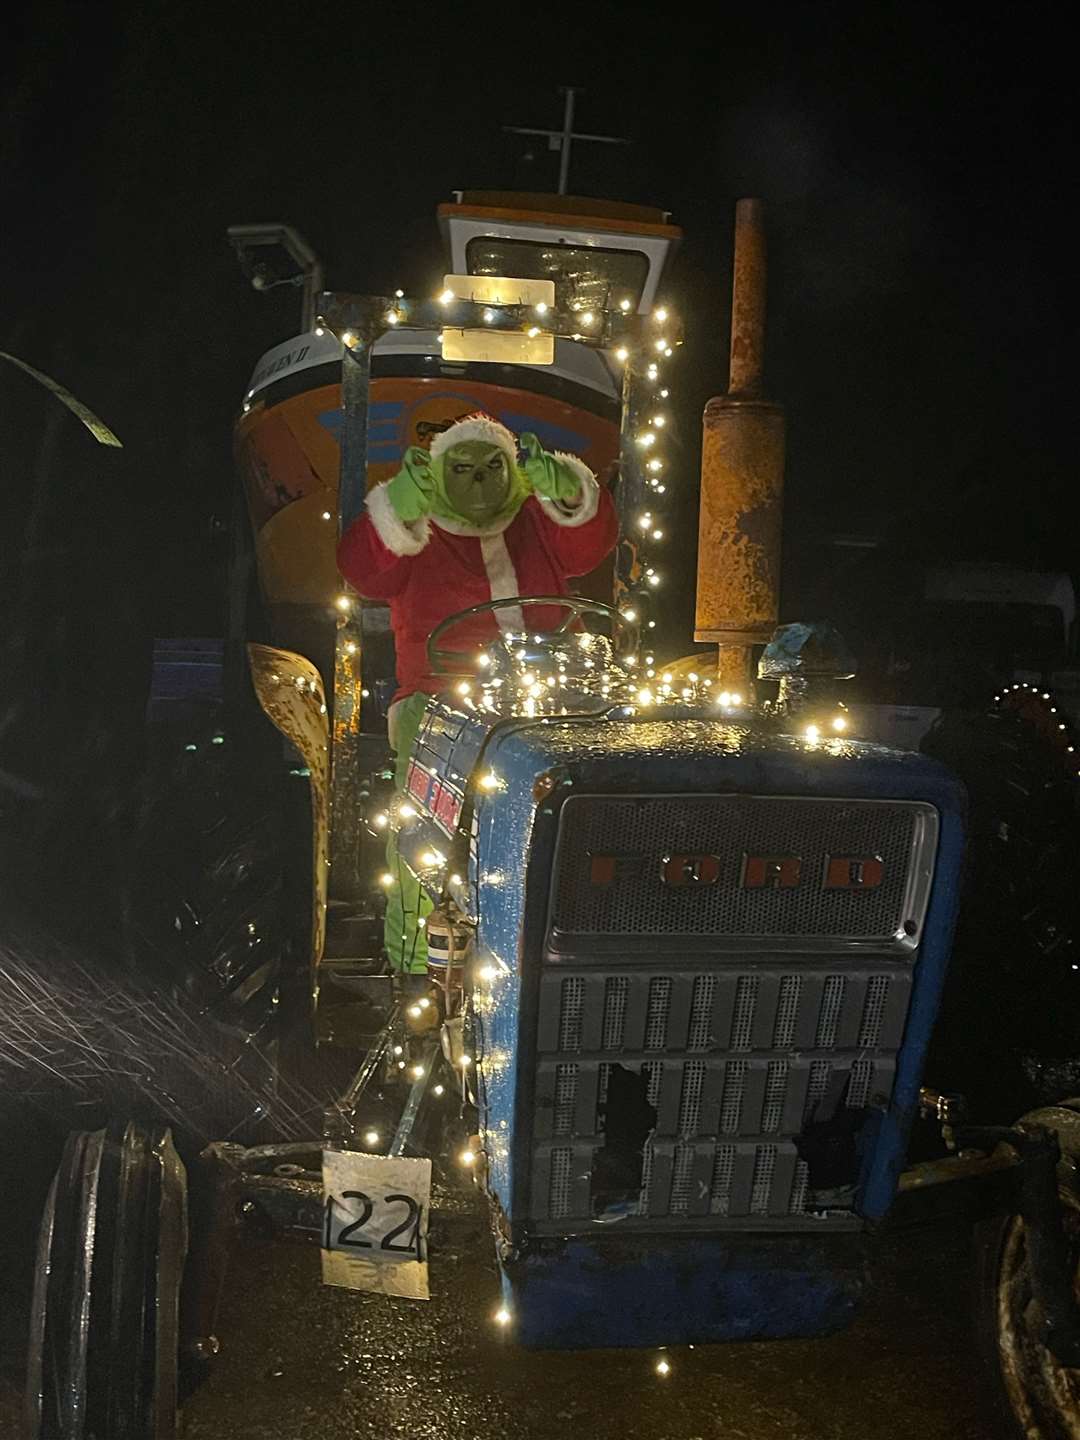 The Grinch at the wheel of a decorated tractor.